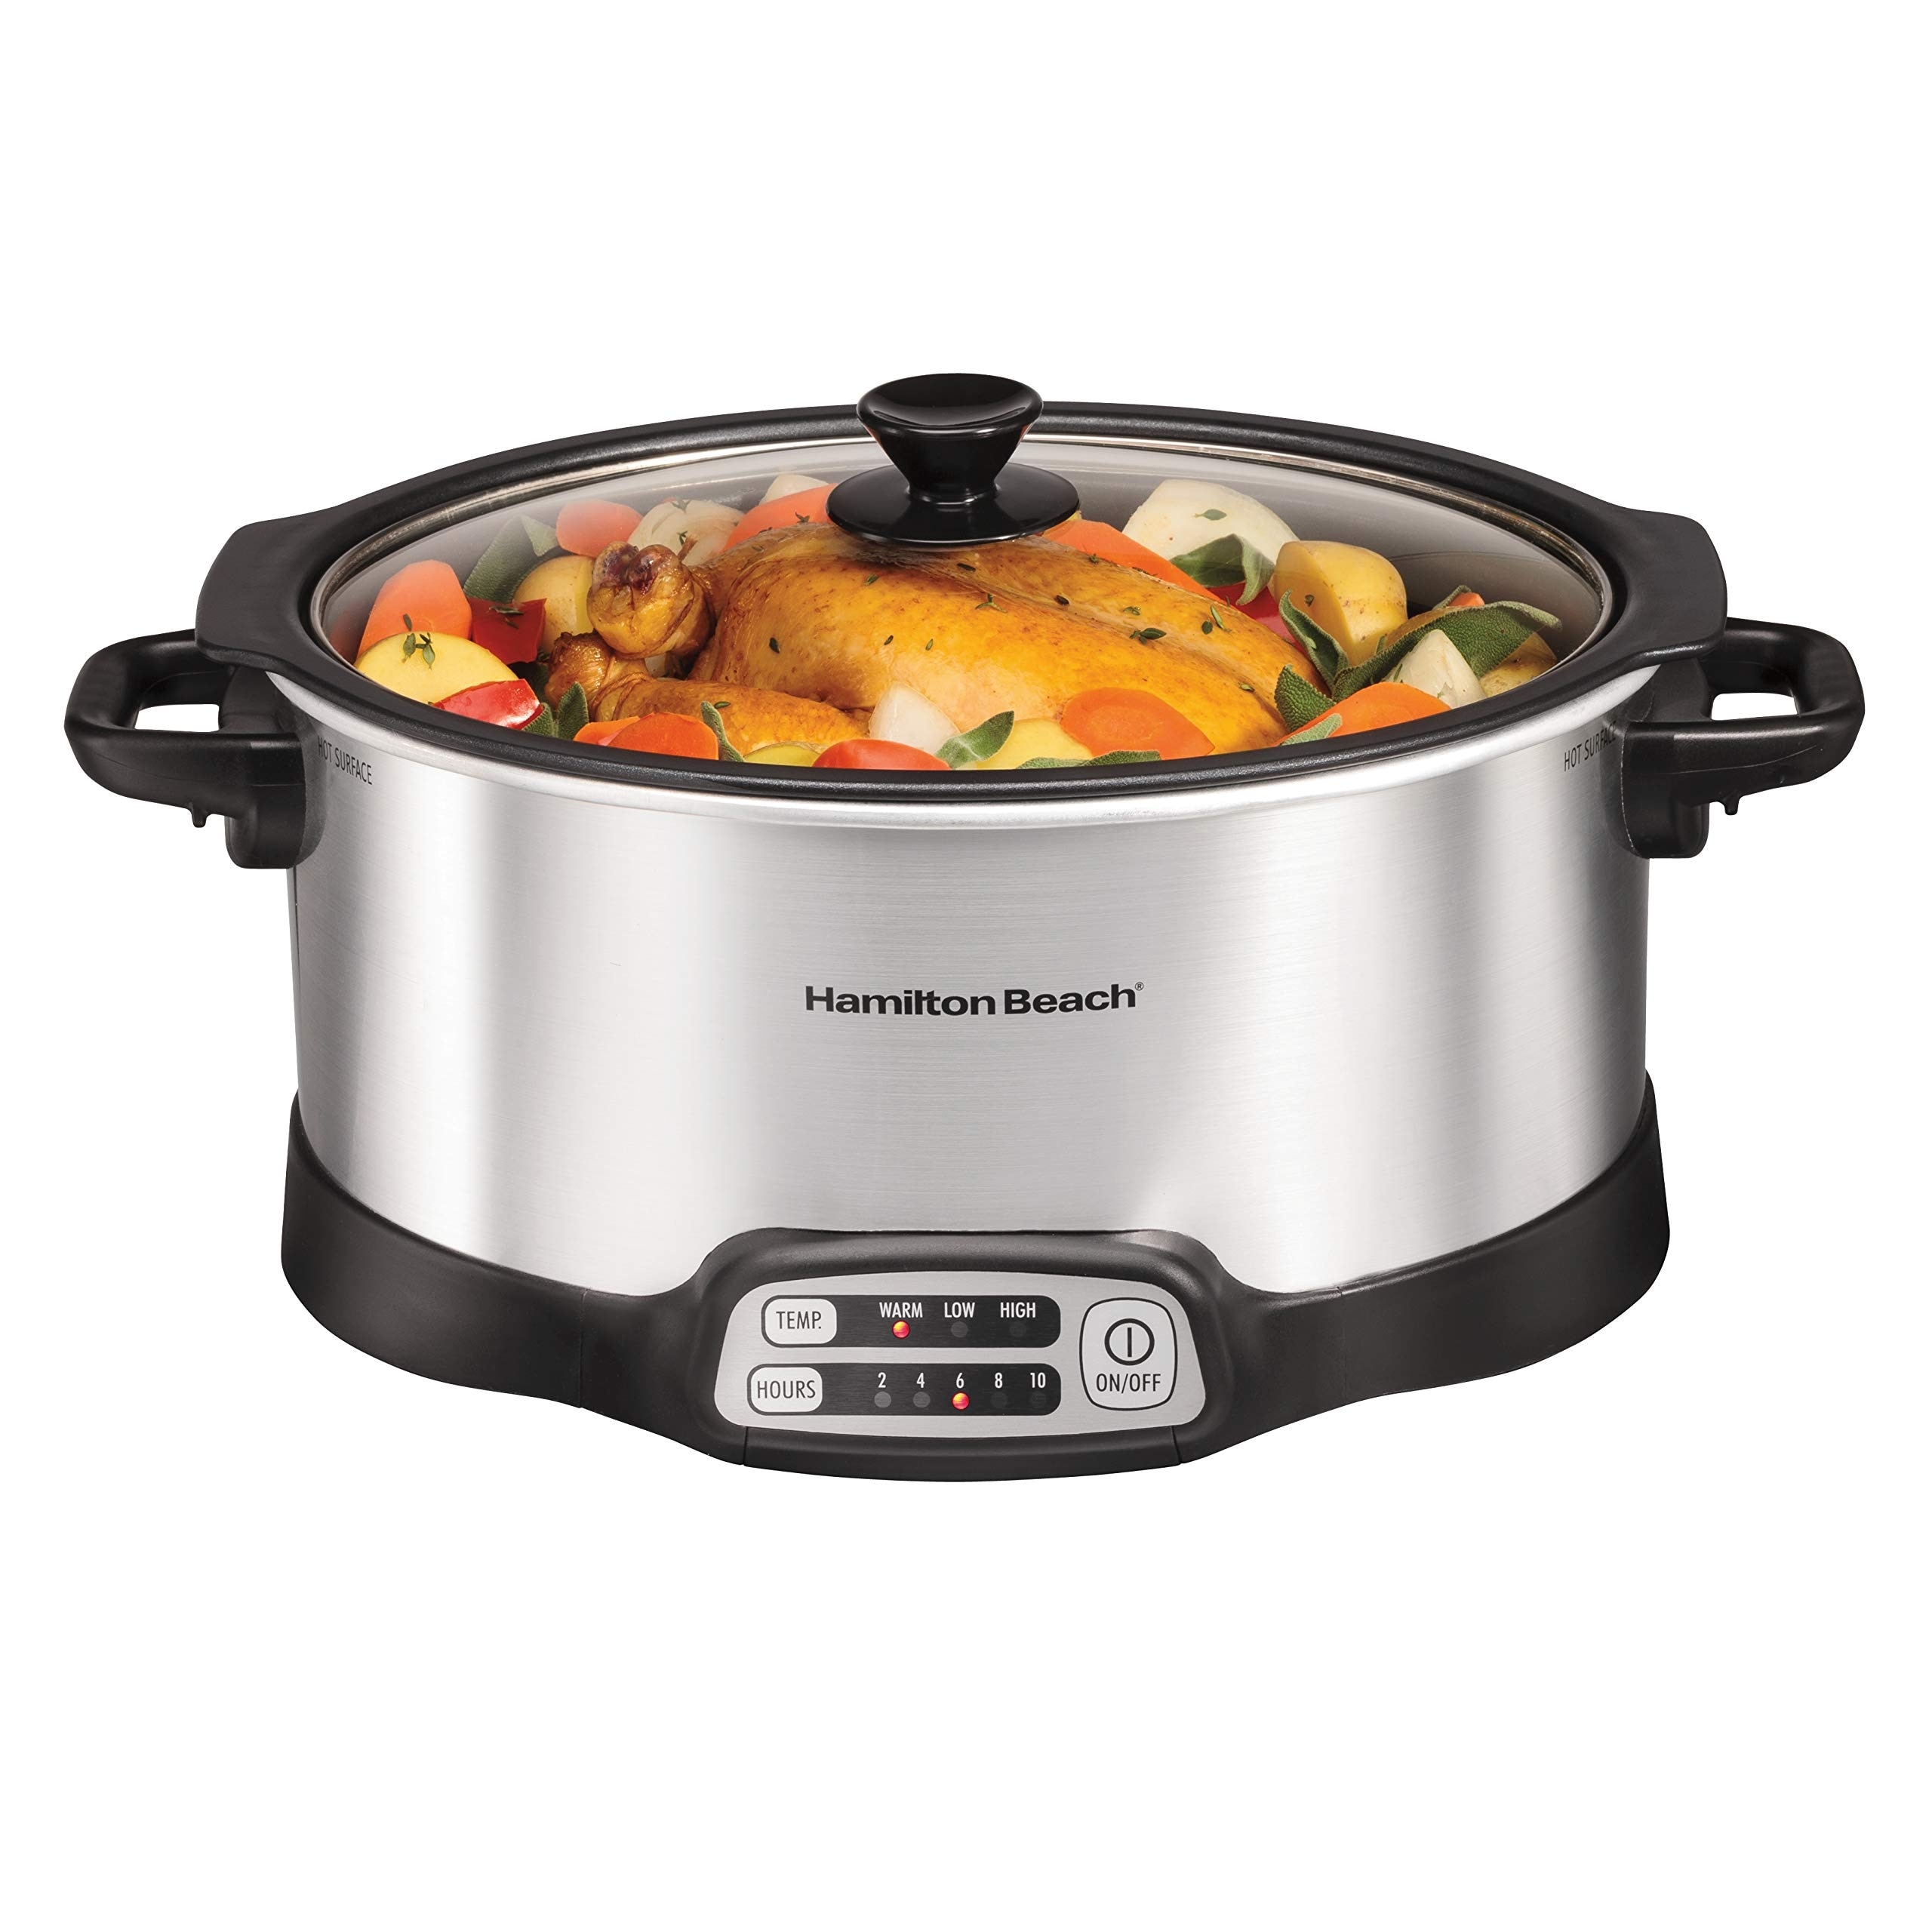 https://ak1.ostkcdn.com/images/products/is/images/direct/24a03314b6f58bd0d6b958a29cf17211a3ad32e0/Programmable-Slow-Cooker-with-6-Quart-Stovetop-Safe-Sear-%26-Cook-Crock%2C-Silver.jpg